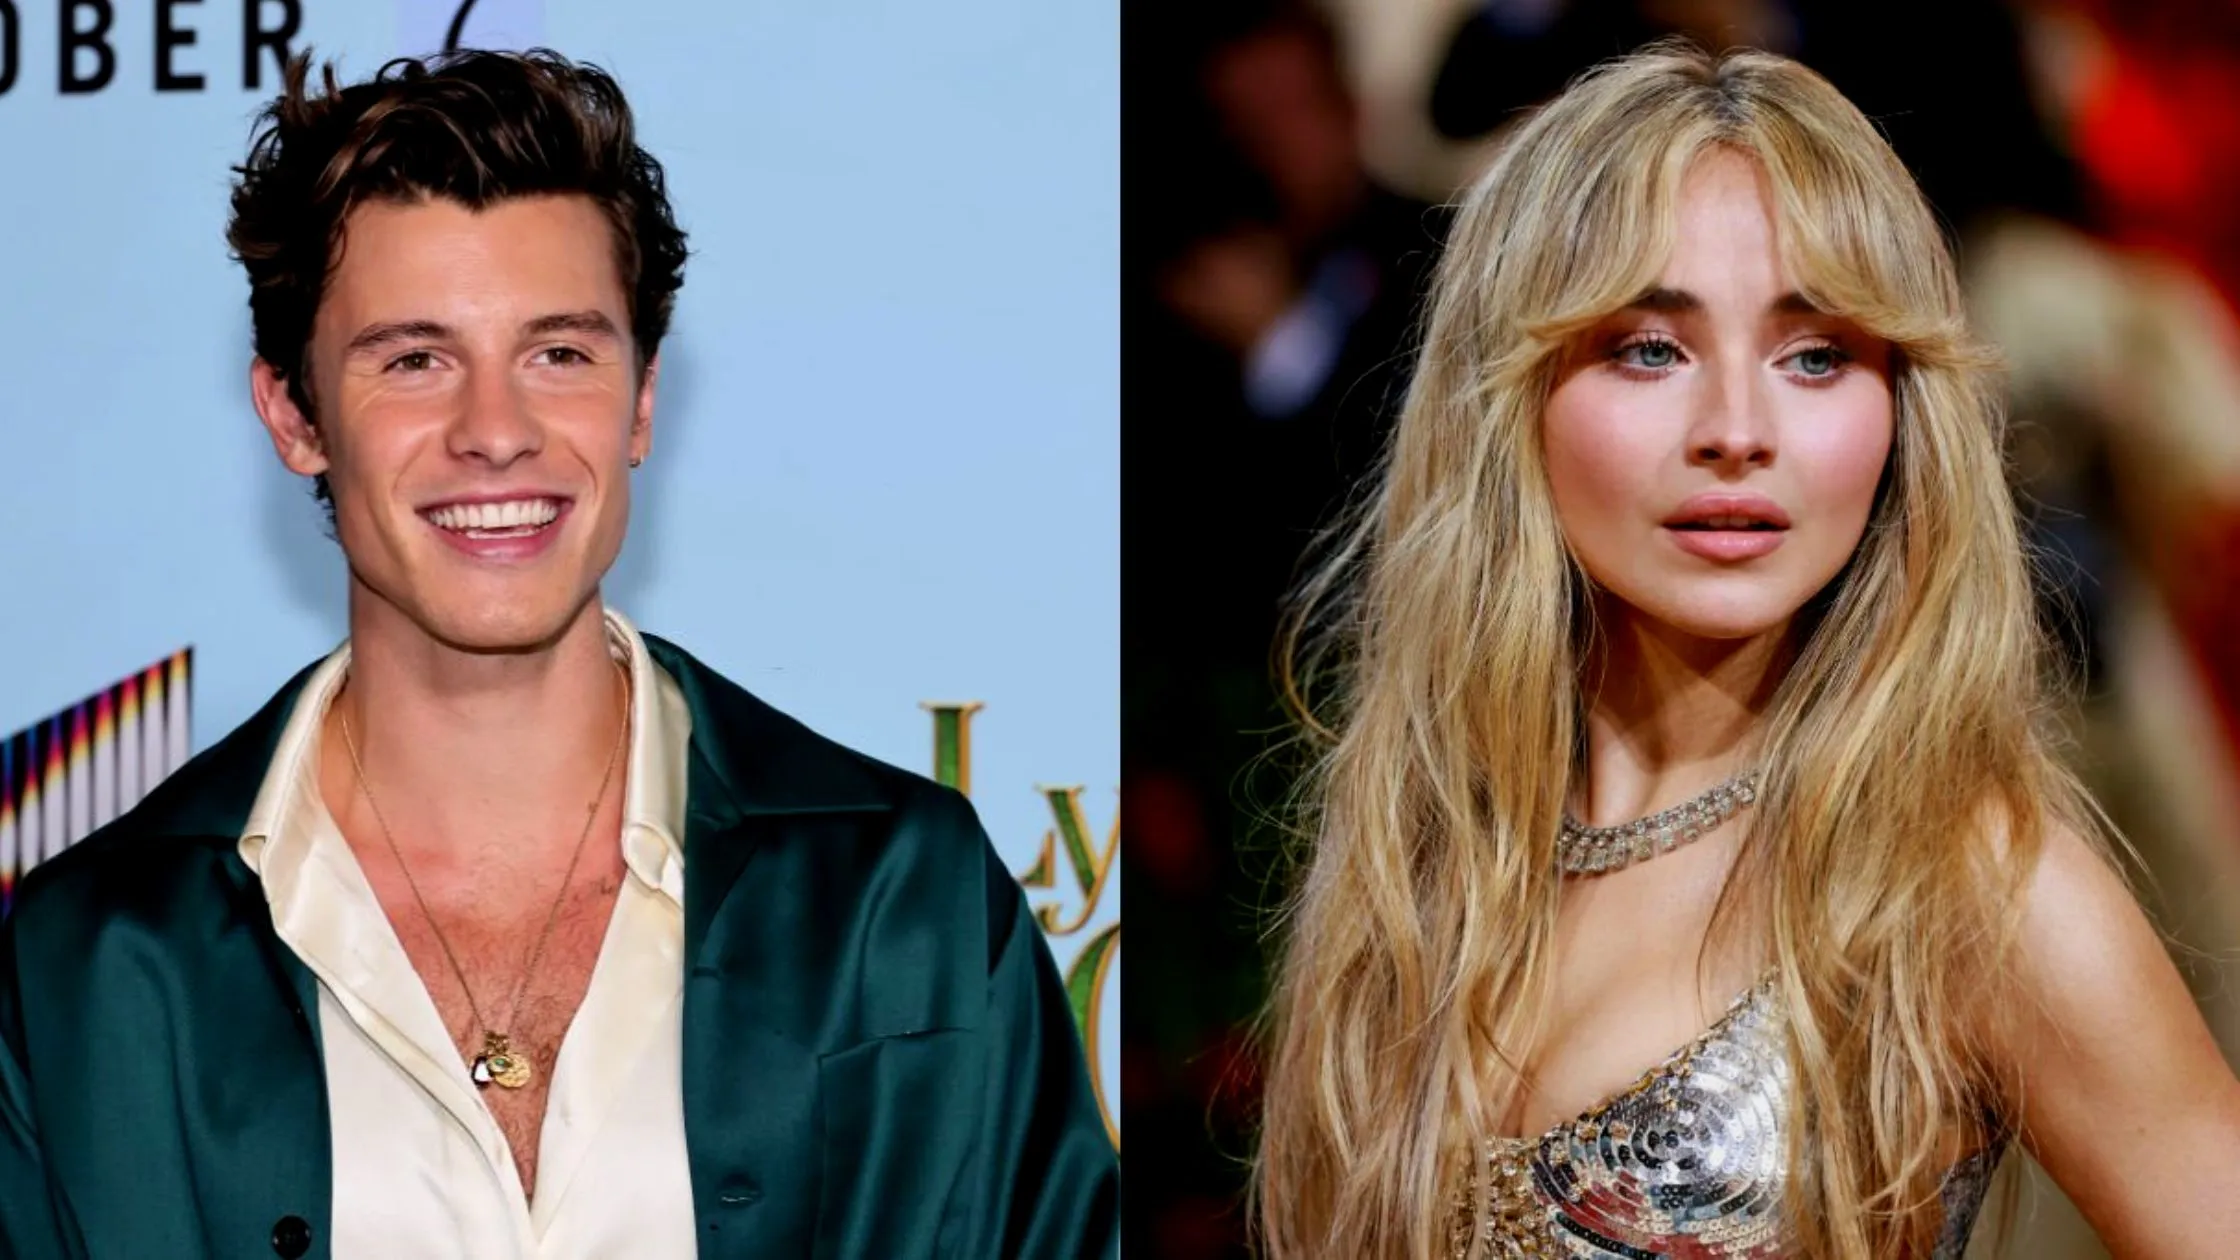 Shawn Mendes And Sabrina Carpenter Dating Rumors-Are They Really In Relationship